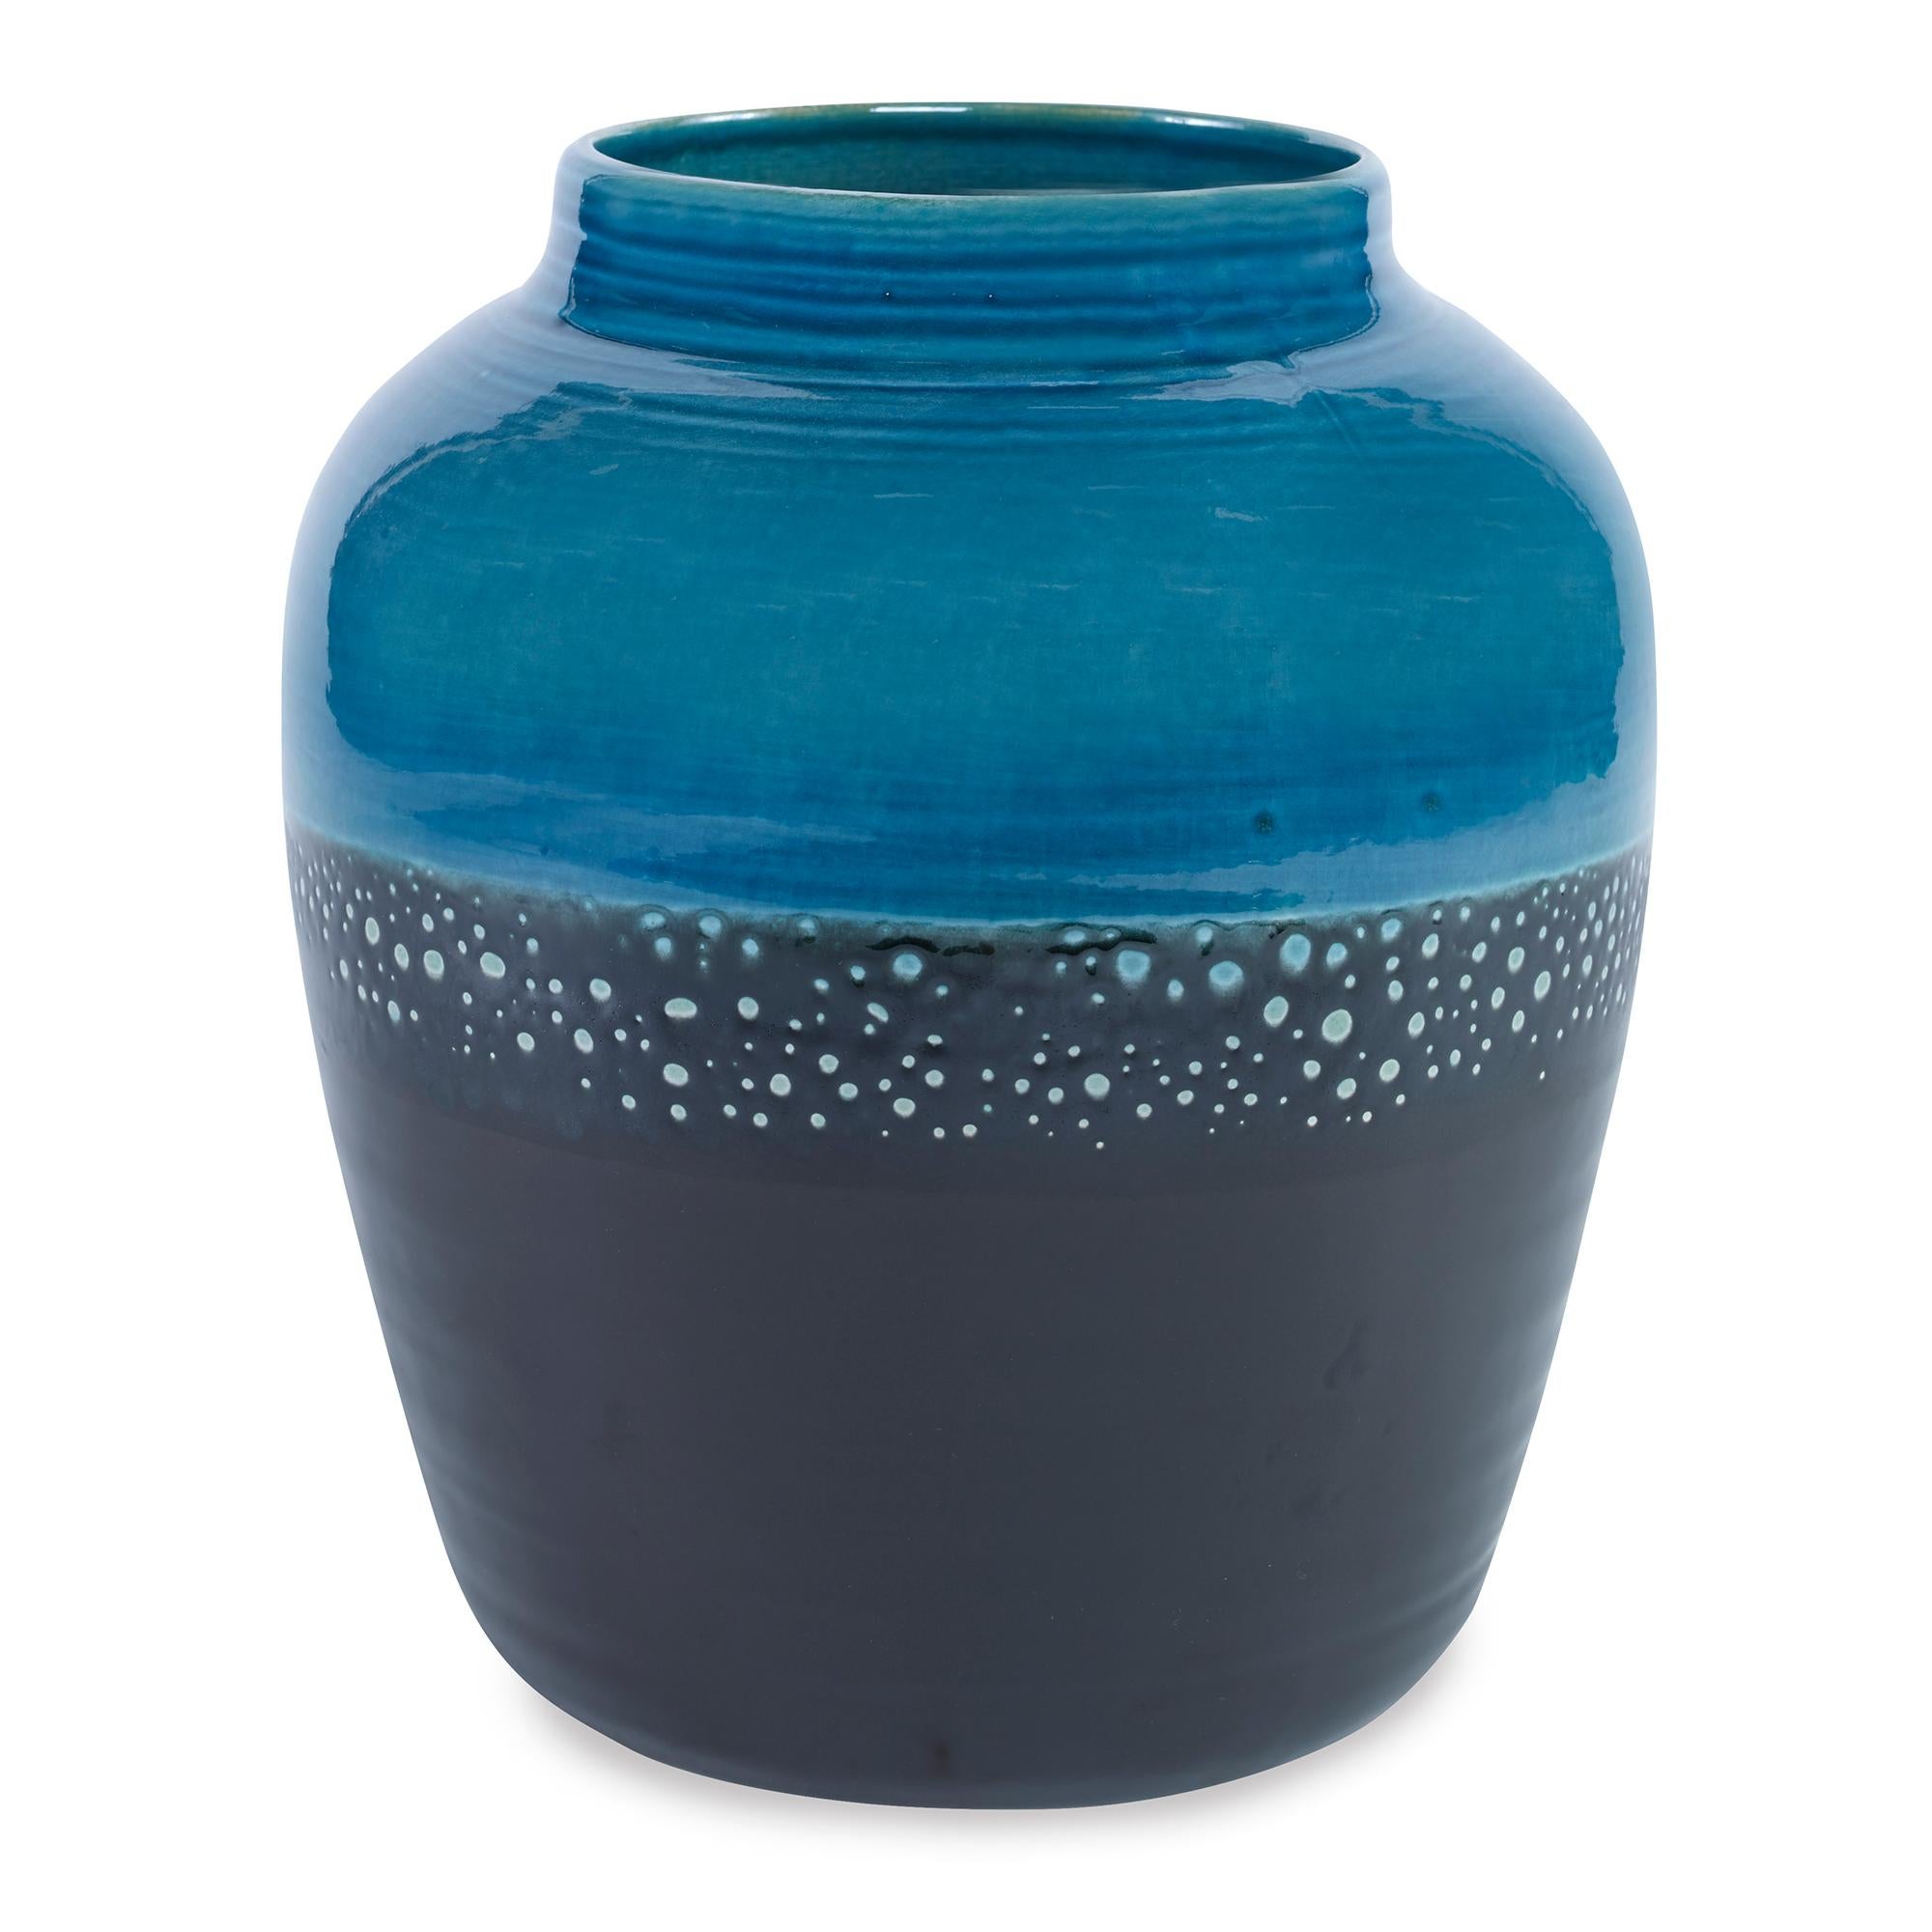 A hand painted, earthenware vase with a reactive blue and black glaze. Due to the handmade nature of this product, variation is to be expected from piece to piece.
 